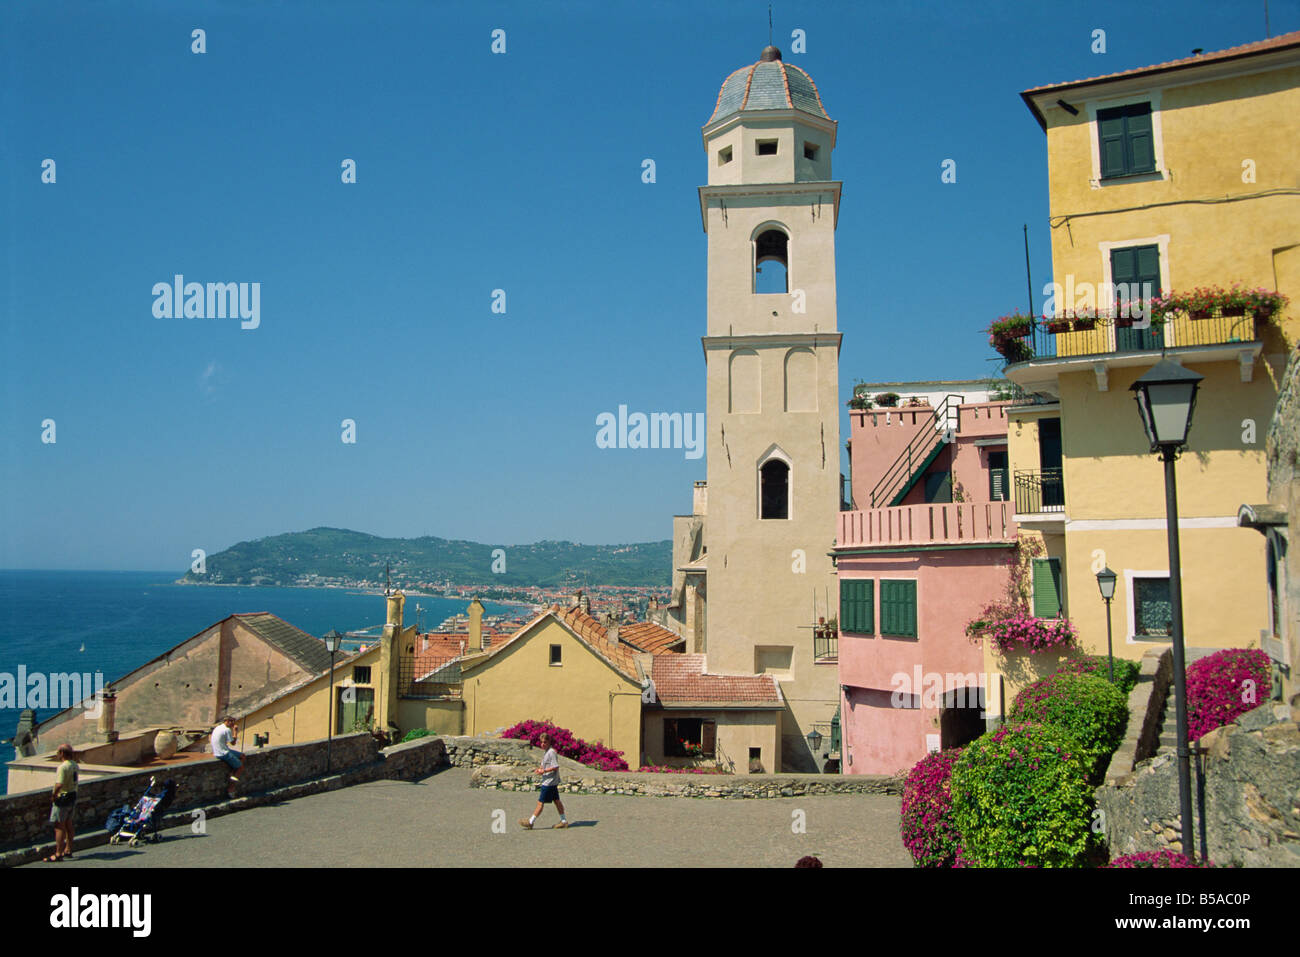 Tower and houses on the Piazza San Giovanni in the town of Cervo in Liguria on the Italian Riviera Italy S Terry Stock Photo